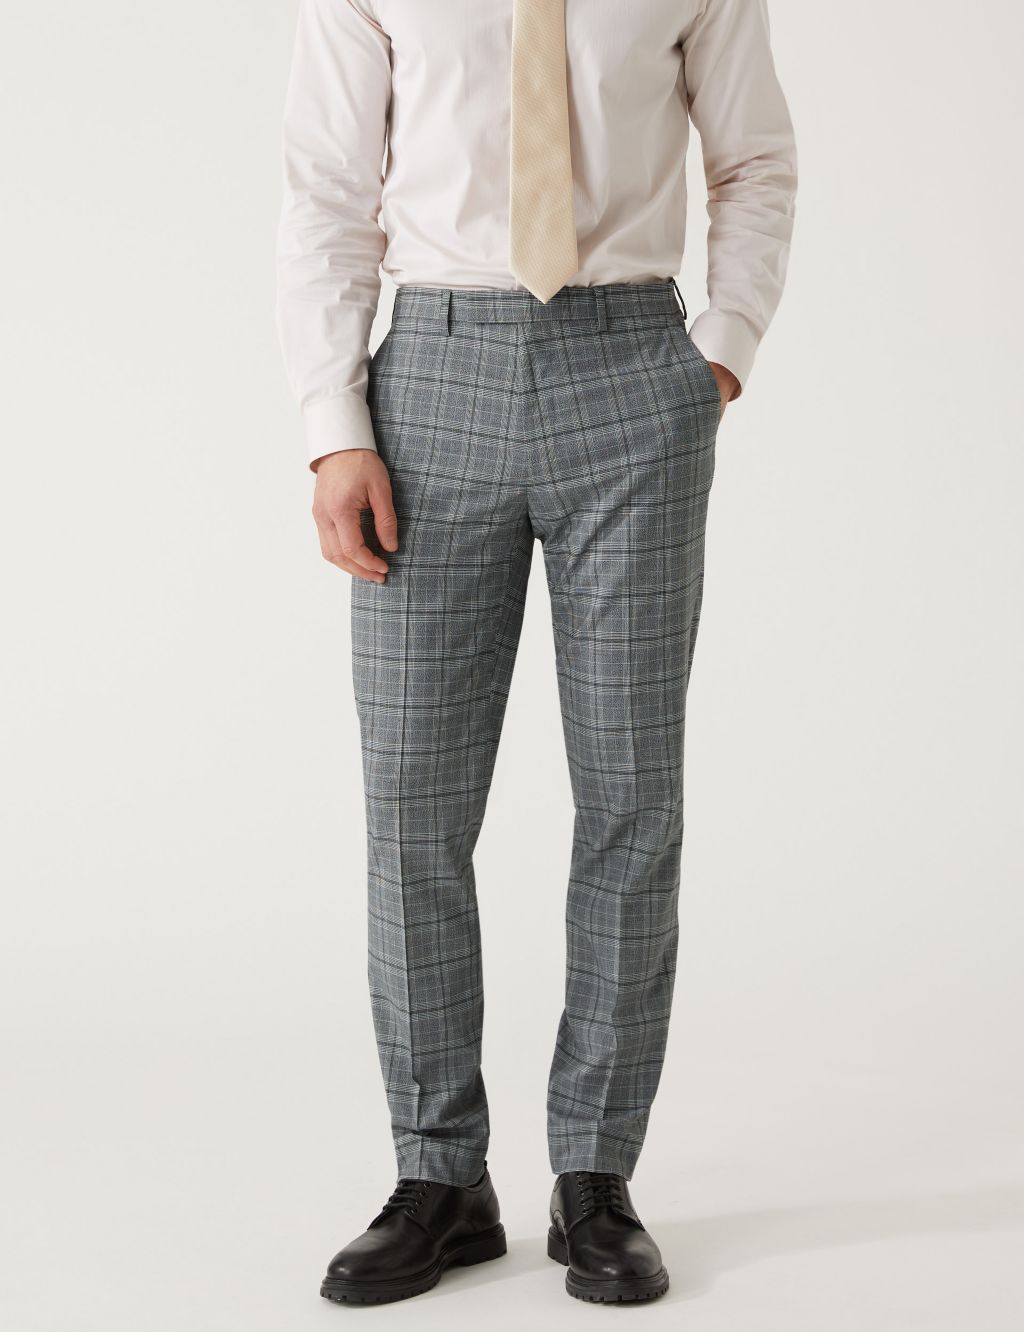 Slim Fit Prince of Wales Check Suit image 4